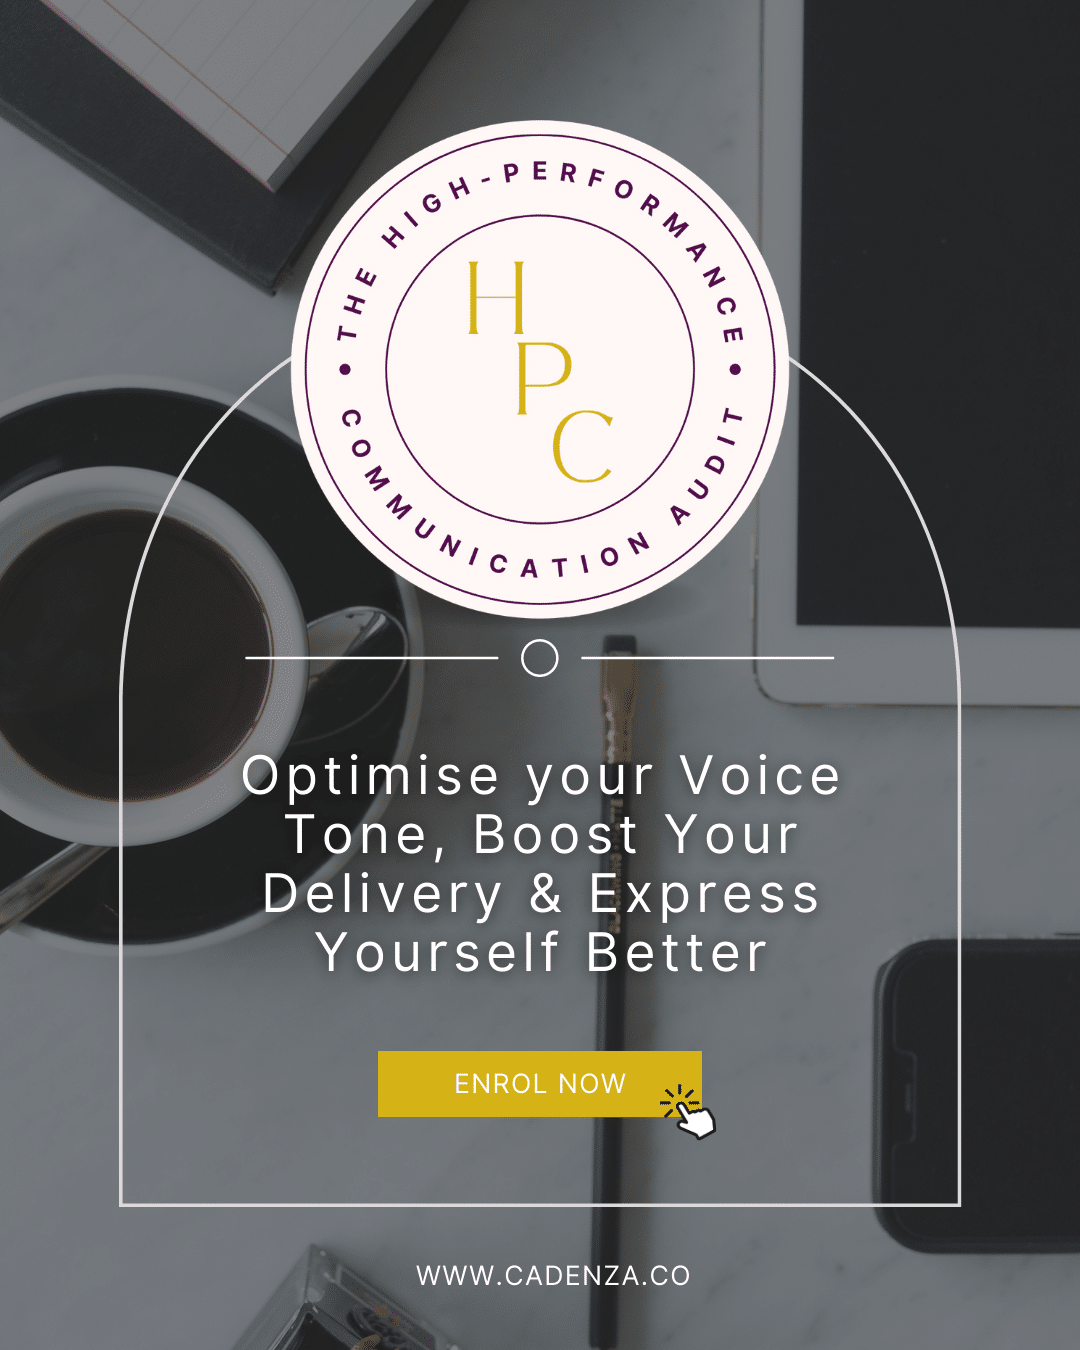 project your voice